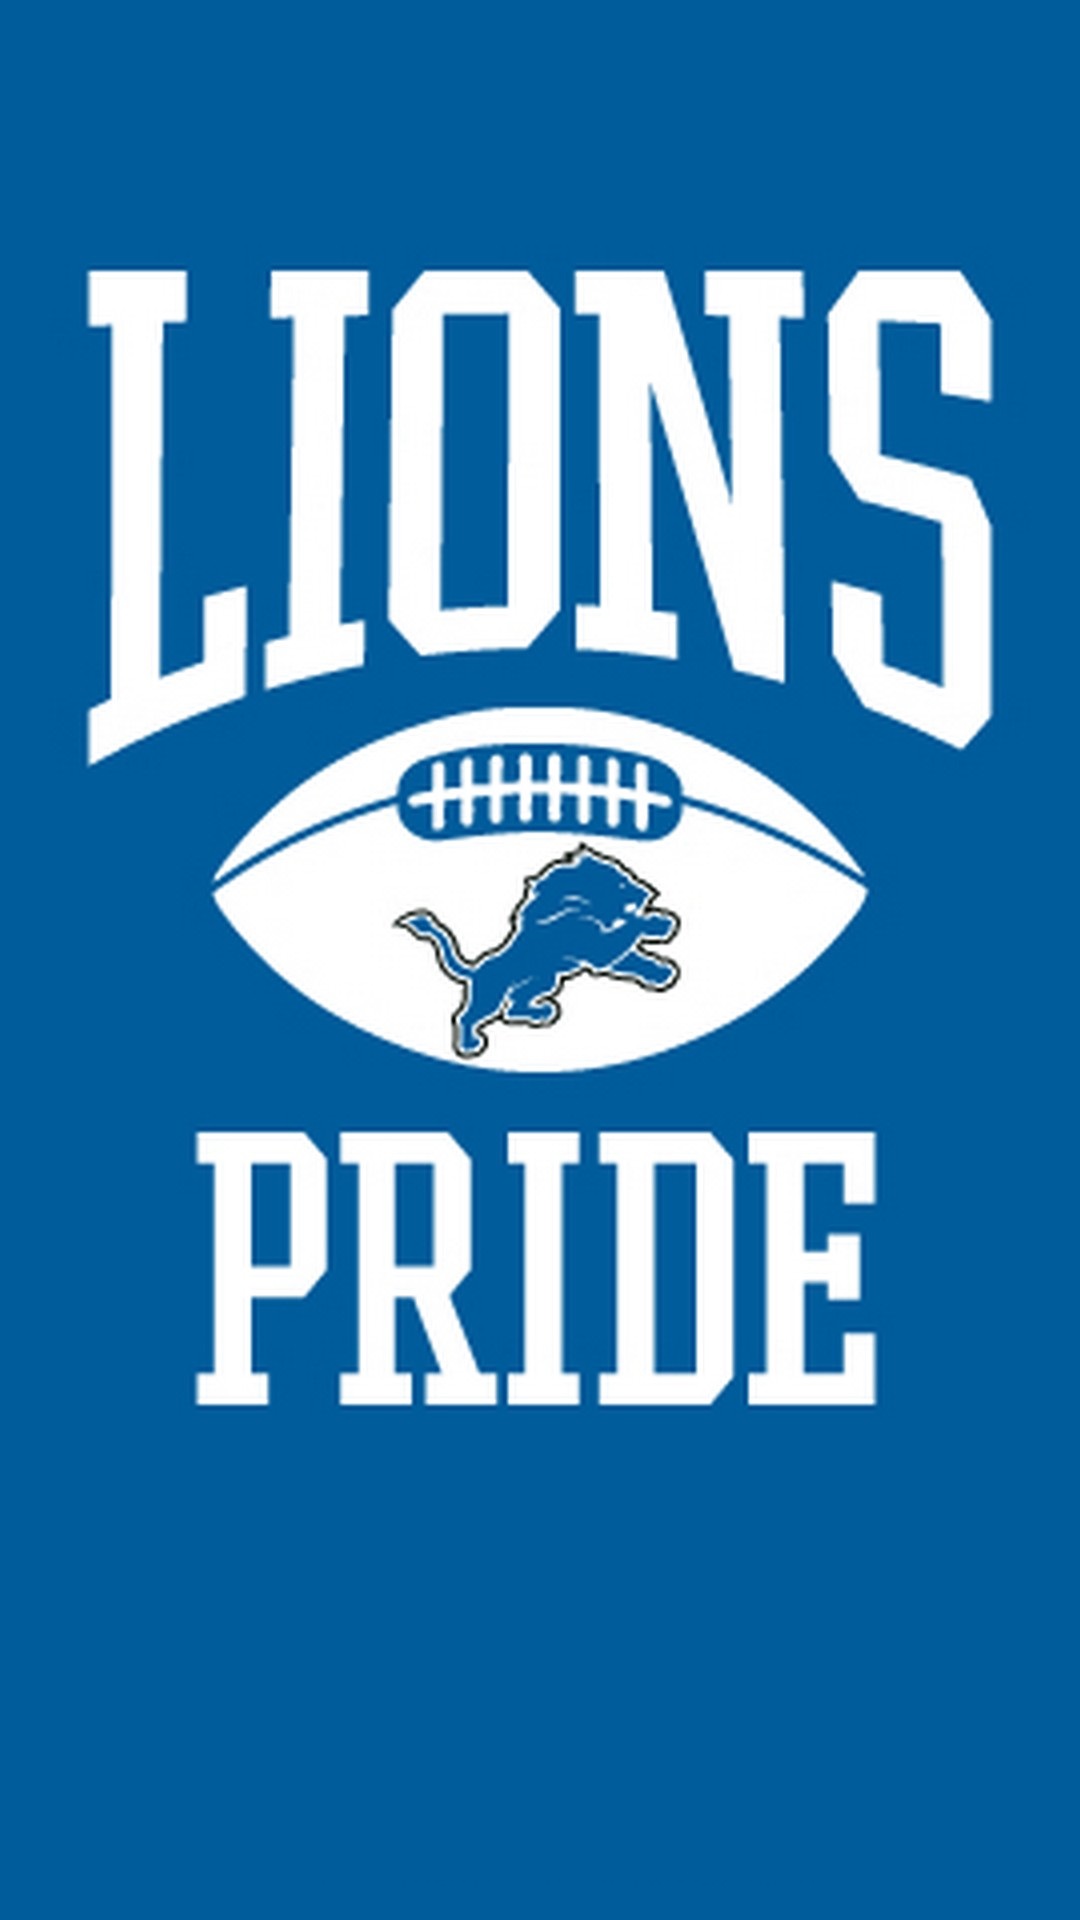 Detroit Lions iPhone X Wallpaper with high-resolution 1080x1920 pixel. Download and set as wallpaper for Apple iPhone X, XS Max, XR, 8, 7, 6, SE, iPad, Android